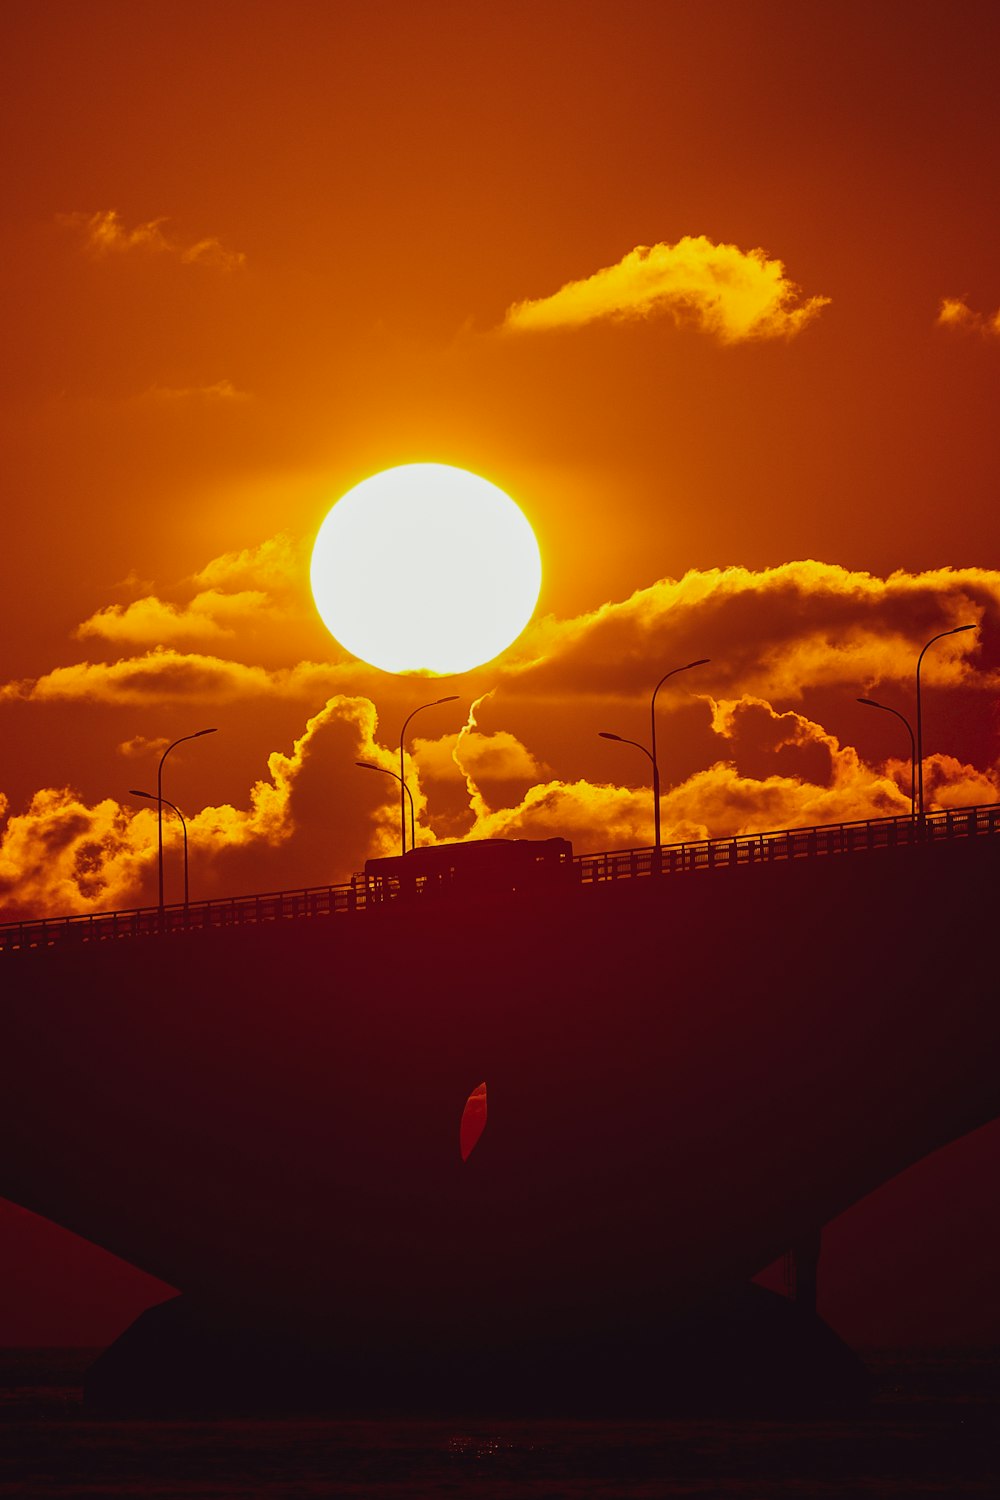 the sun is setting over a bridge in the sky